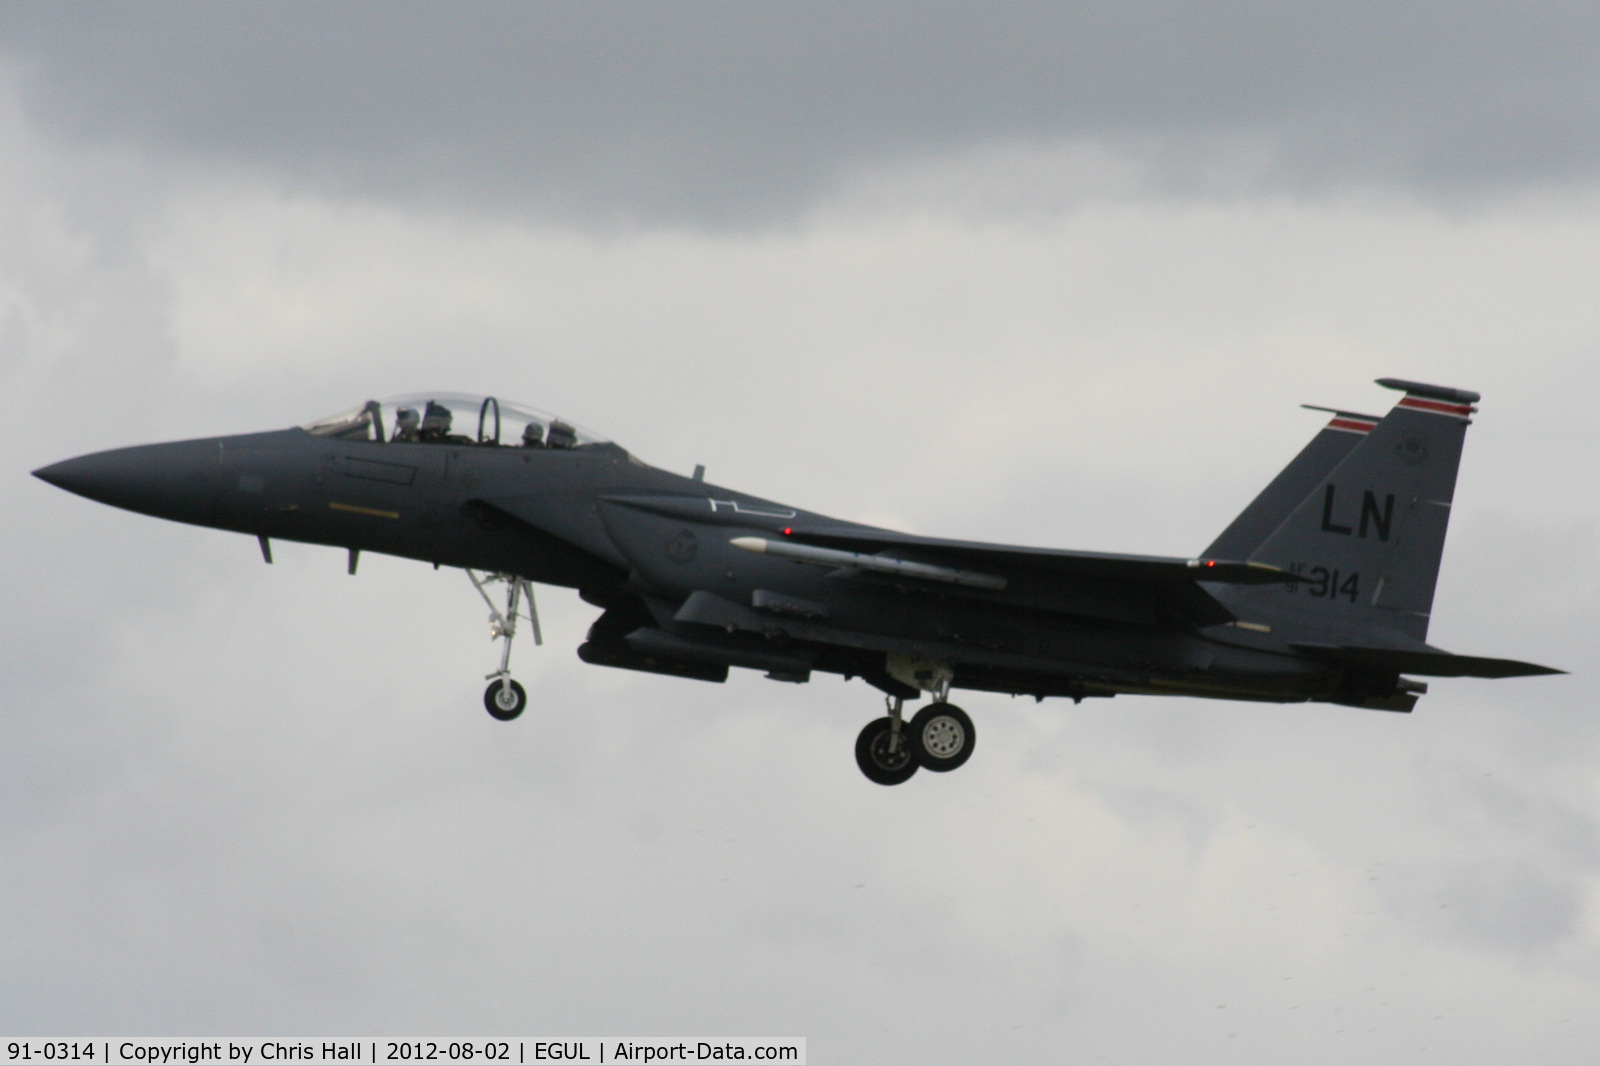 91-0314, 1991 McDonnell Douglas F-15E Strike Eagle C/N 1221/E179, 492nd Fighter Squadron “Madhatters”